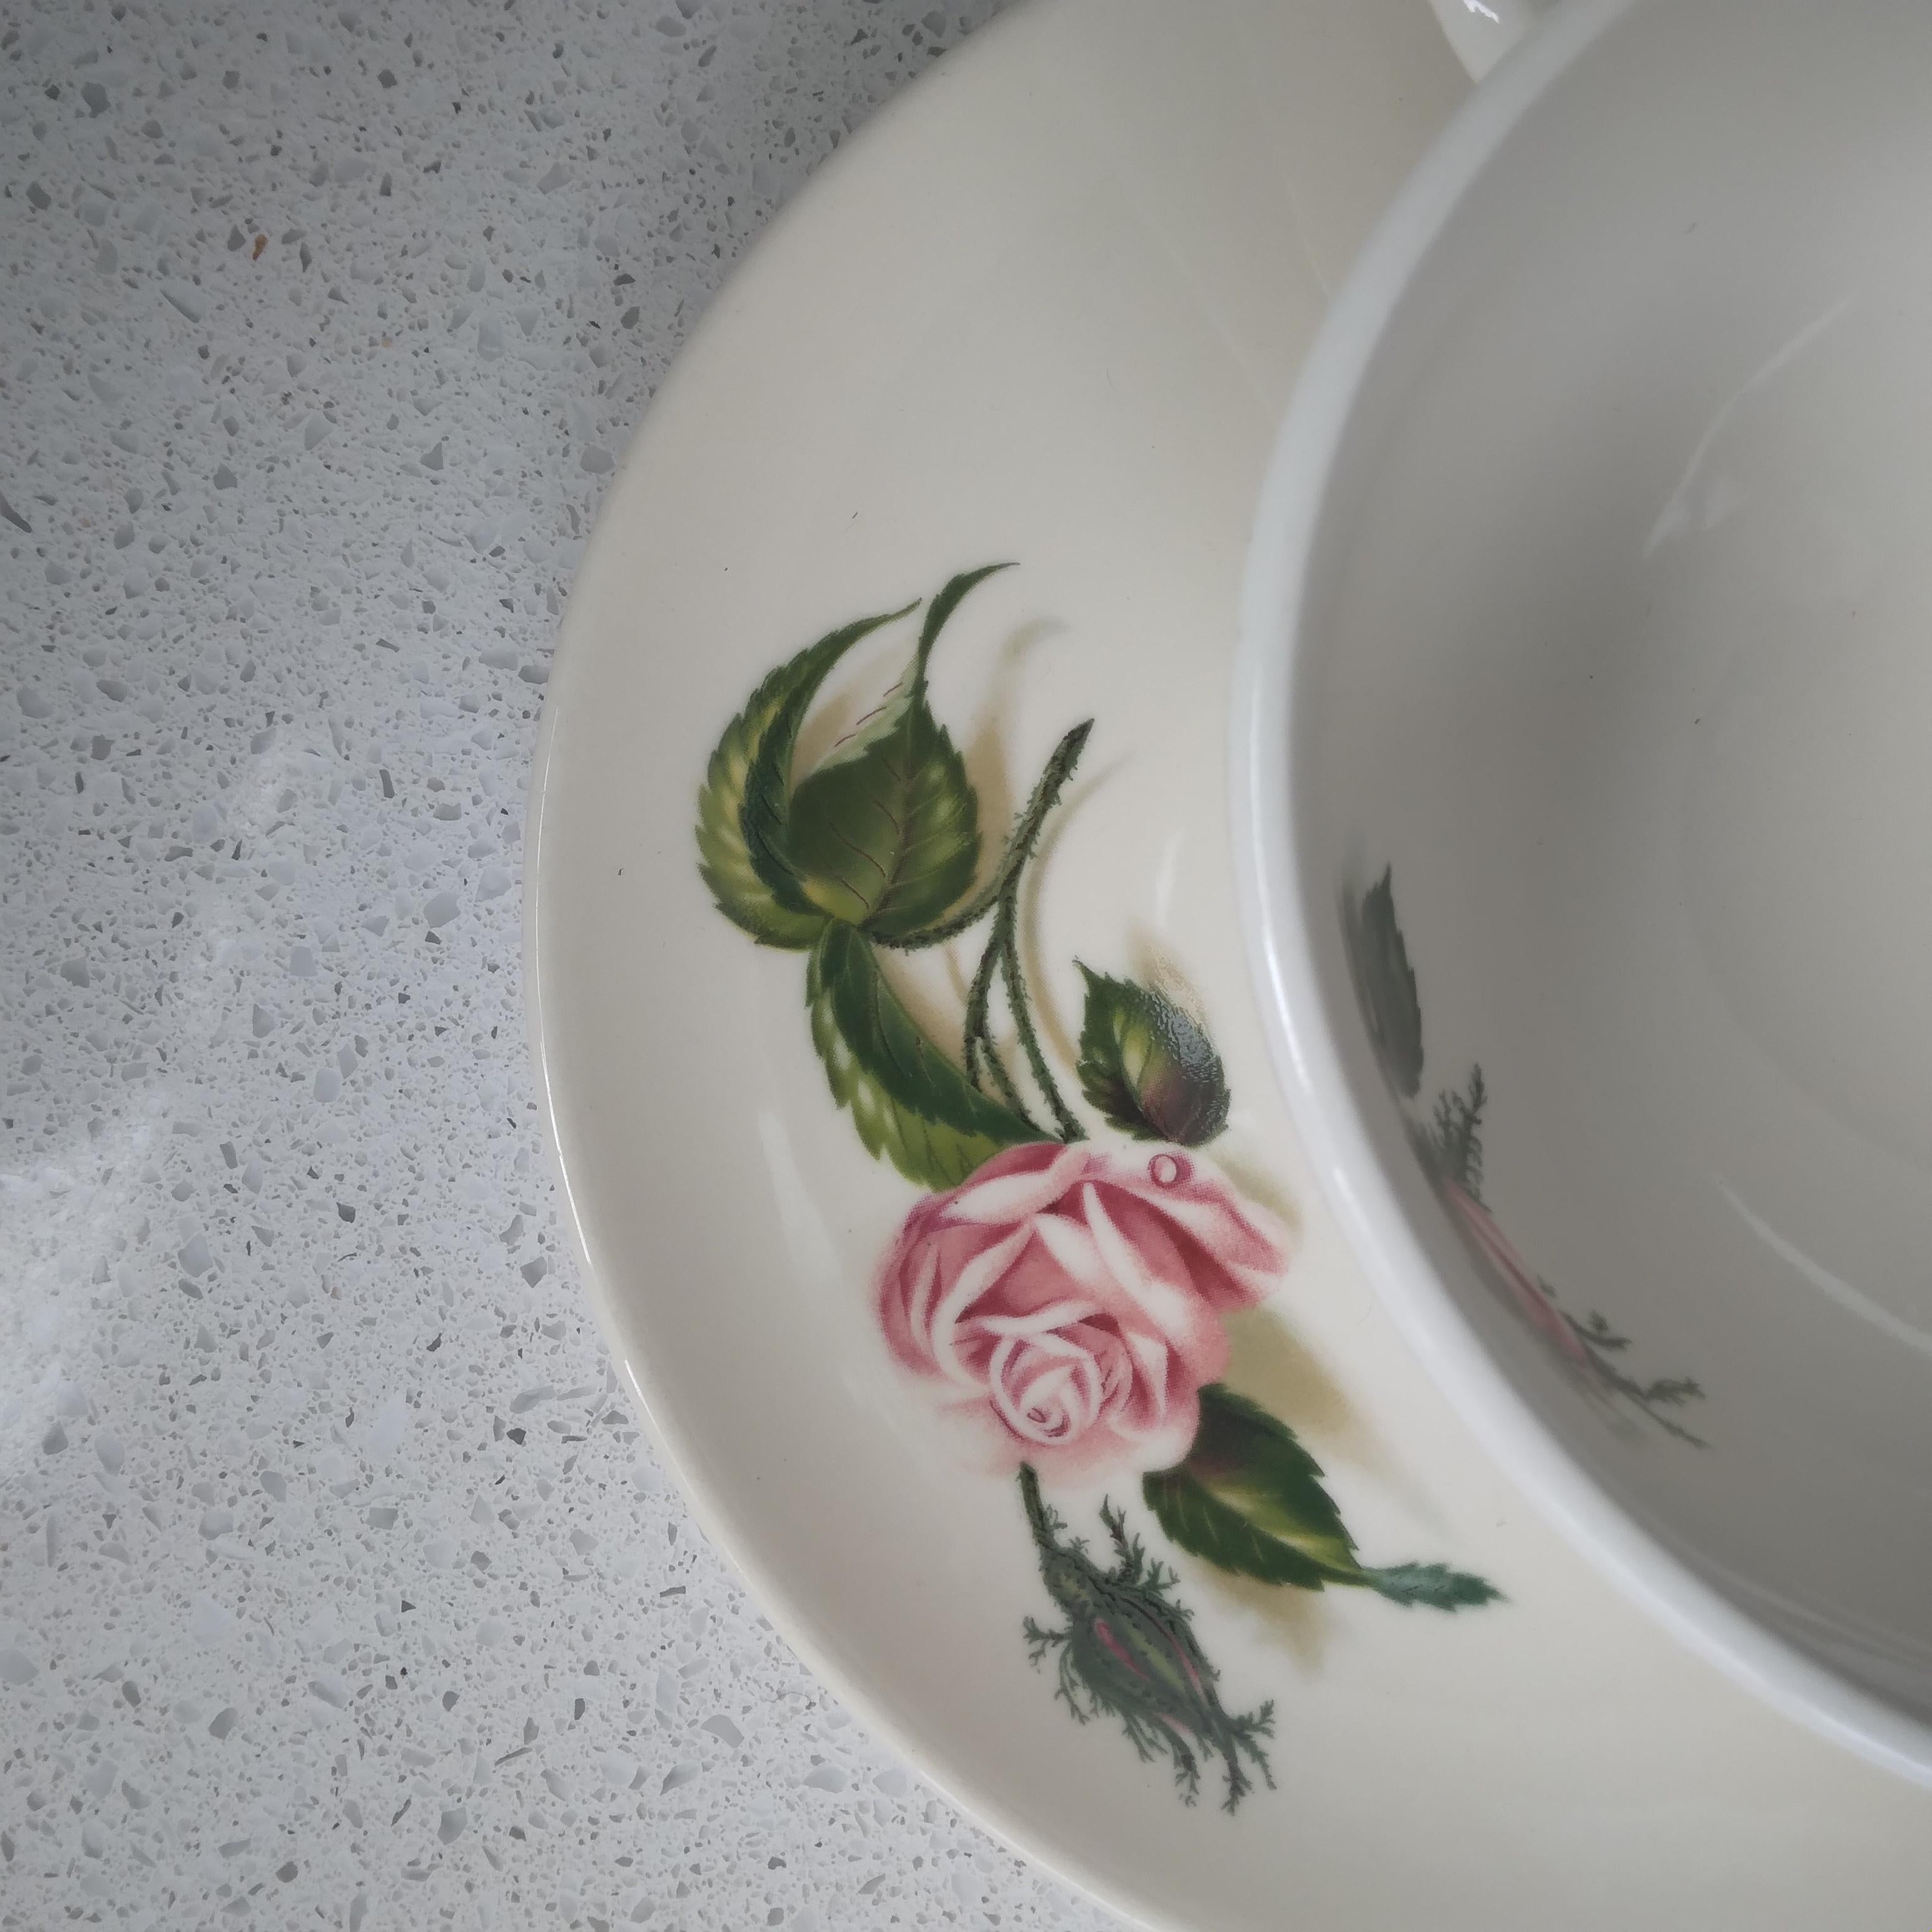 Adorably vintage, this rose garden inspired tea set is pretty and enduring.

In the early 1950s, Universal Pottery debuted their Ballerina line - an elegant and graceful dishware collection that came in a variety of designer solids and florals so